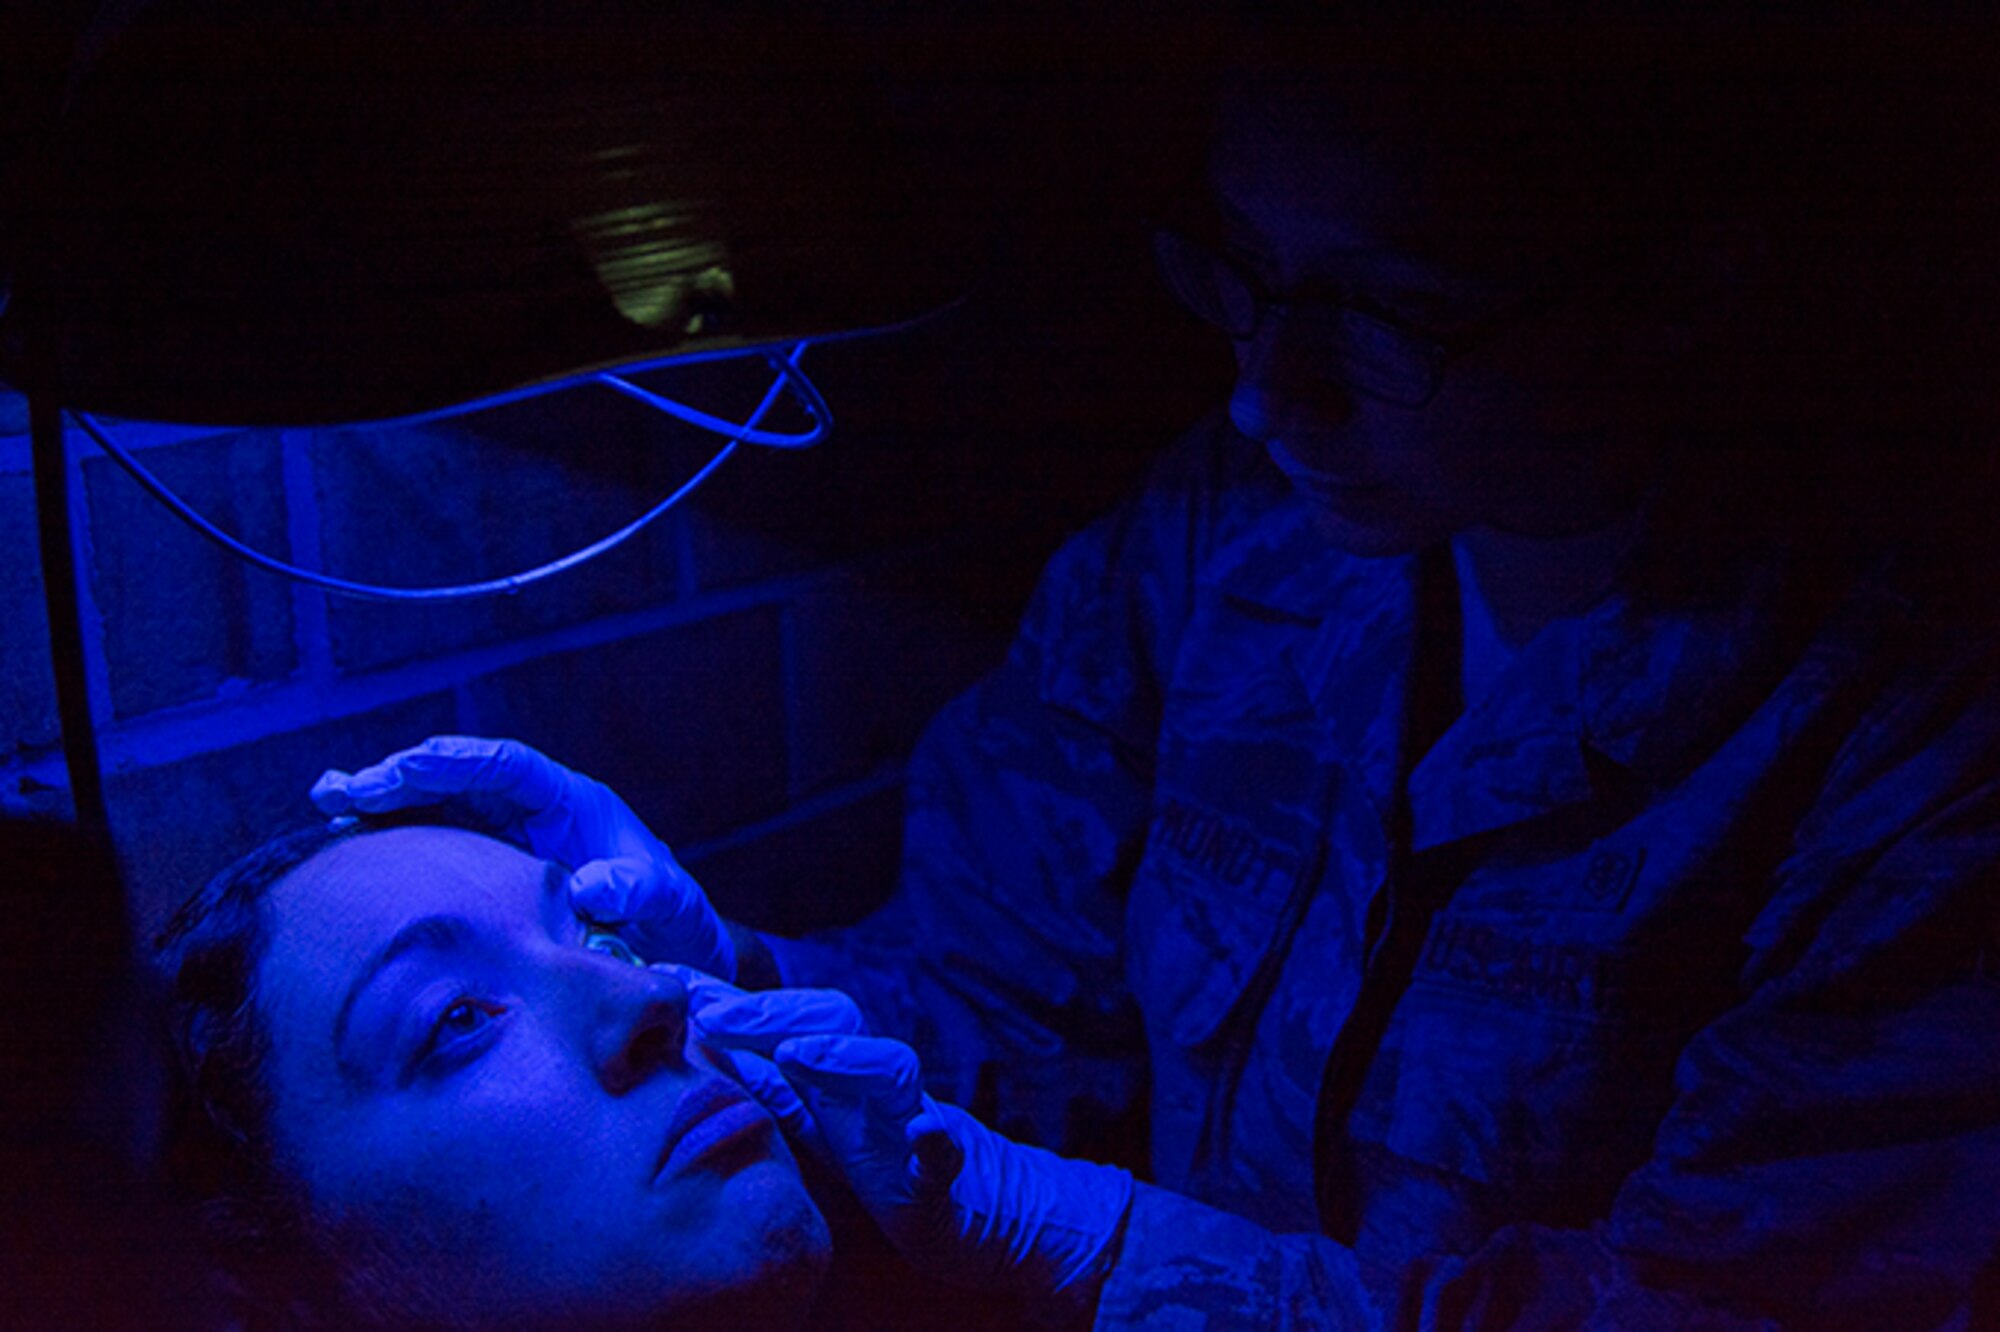 Senior Airman Desire Mora-Mundt, an optometry technician assigned to the 434th Air Refueling Wing, Grissom Air Base conducts a vision exam on a patient in Swain County during the Smoky Mountain Medical Innovative Readiness Training in Bryson City, N.C., Aug. 5, 2017. The program provides no cost medical, dental, ophthalmologic, and veterinary services to residents of Clay County, Swain County and the surrounding areas. (U.S. Air Force photo by Senior Airman Damien Taylor)